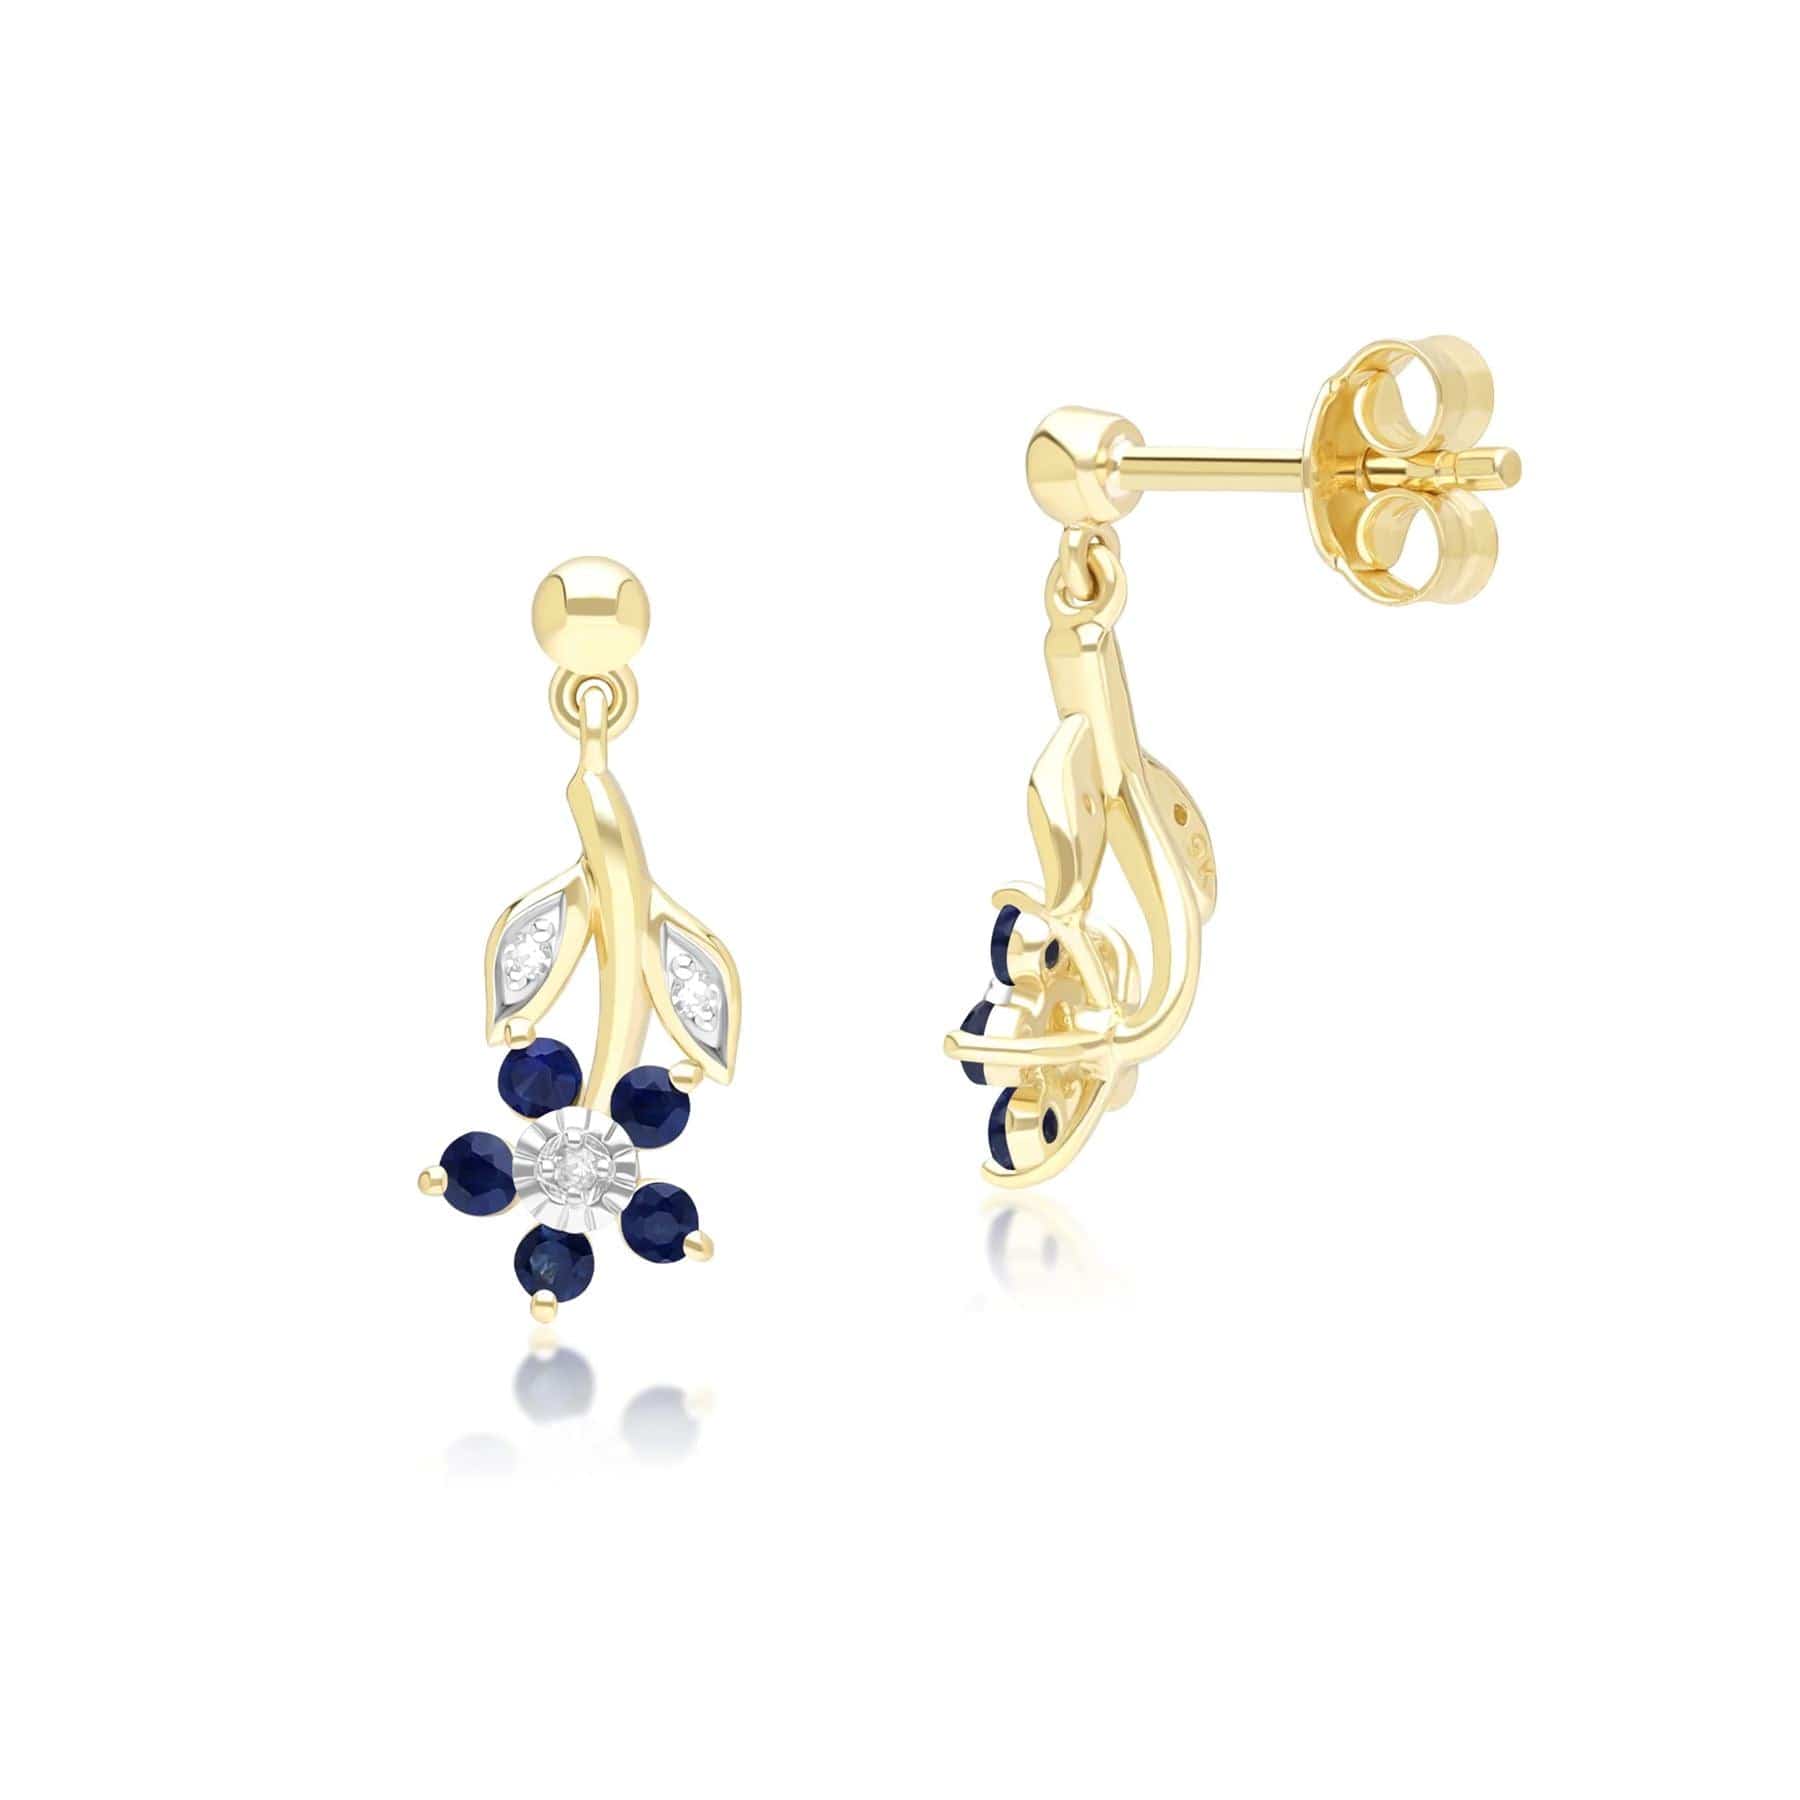 Floral Sapphire & Diamond Drop Earrings in 9ct Yellow Gold